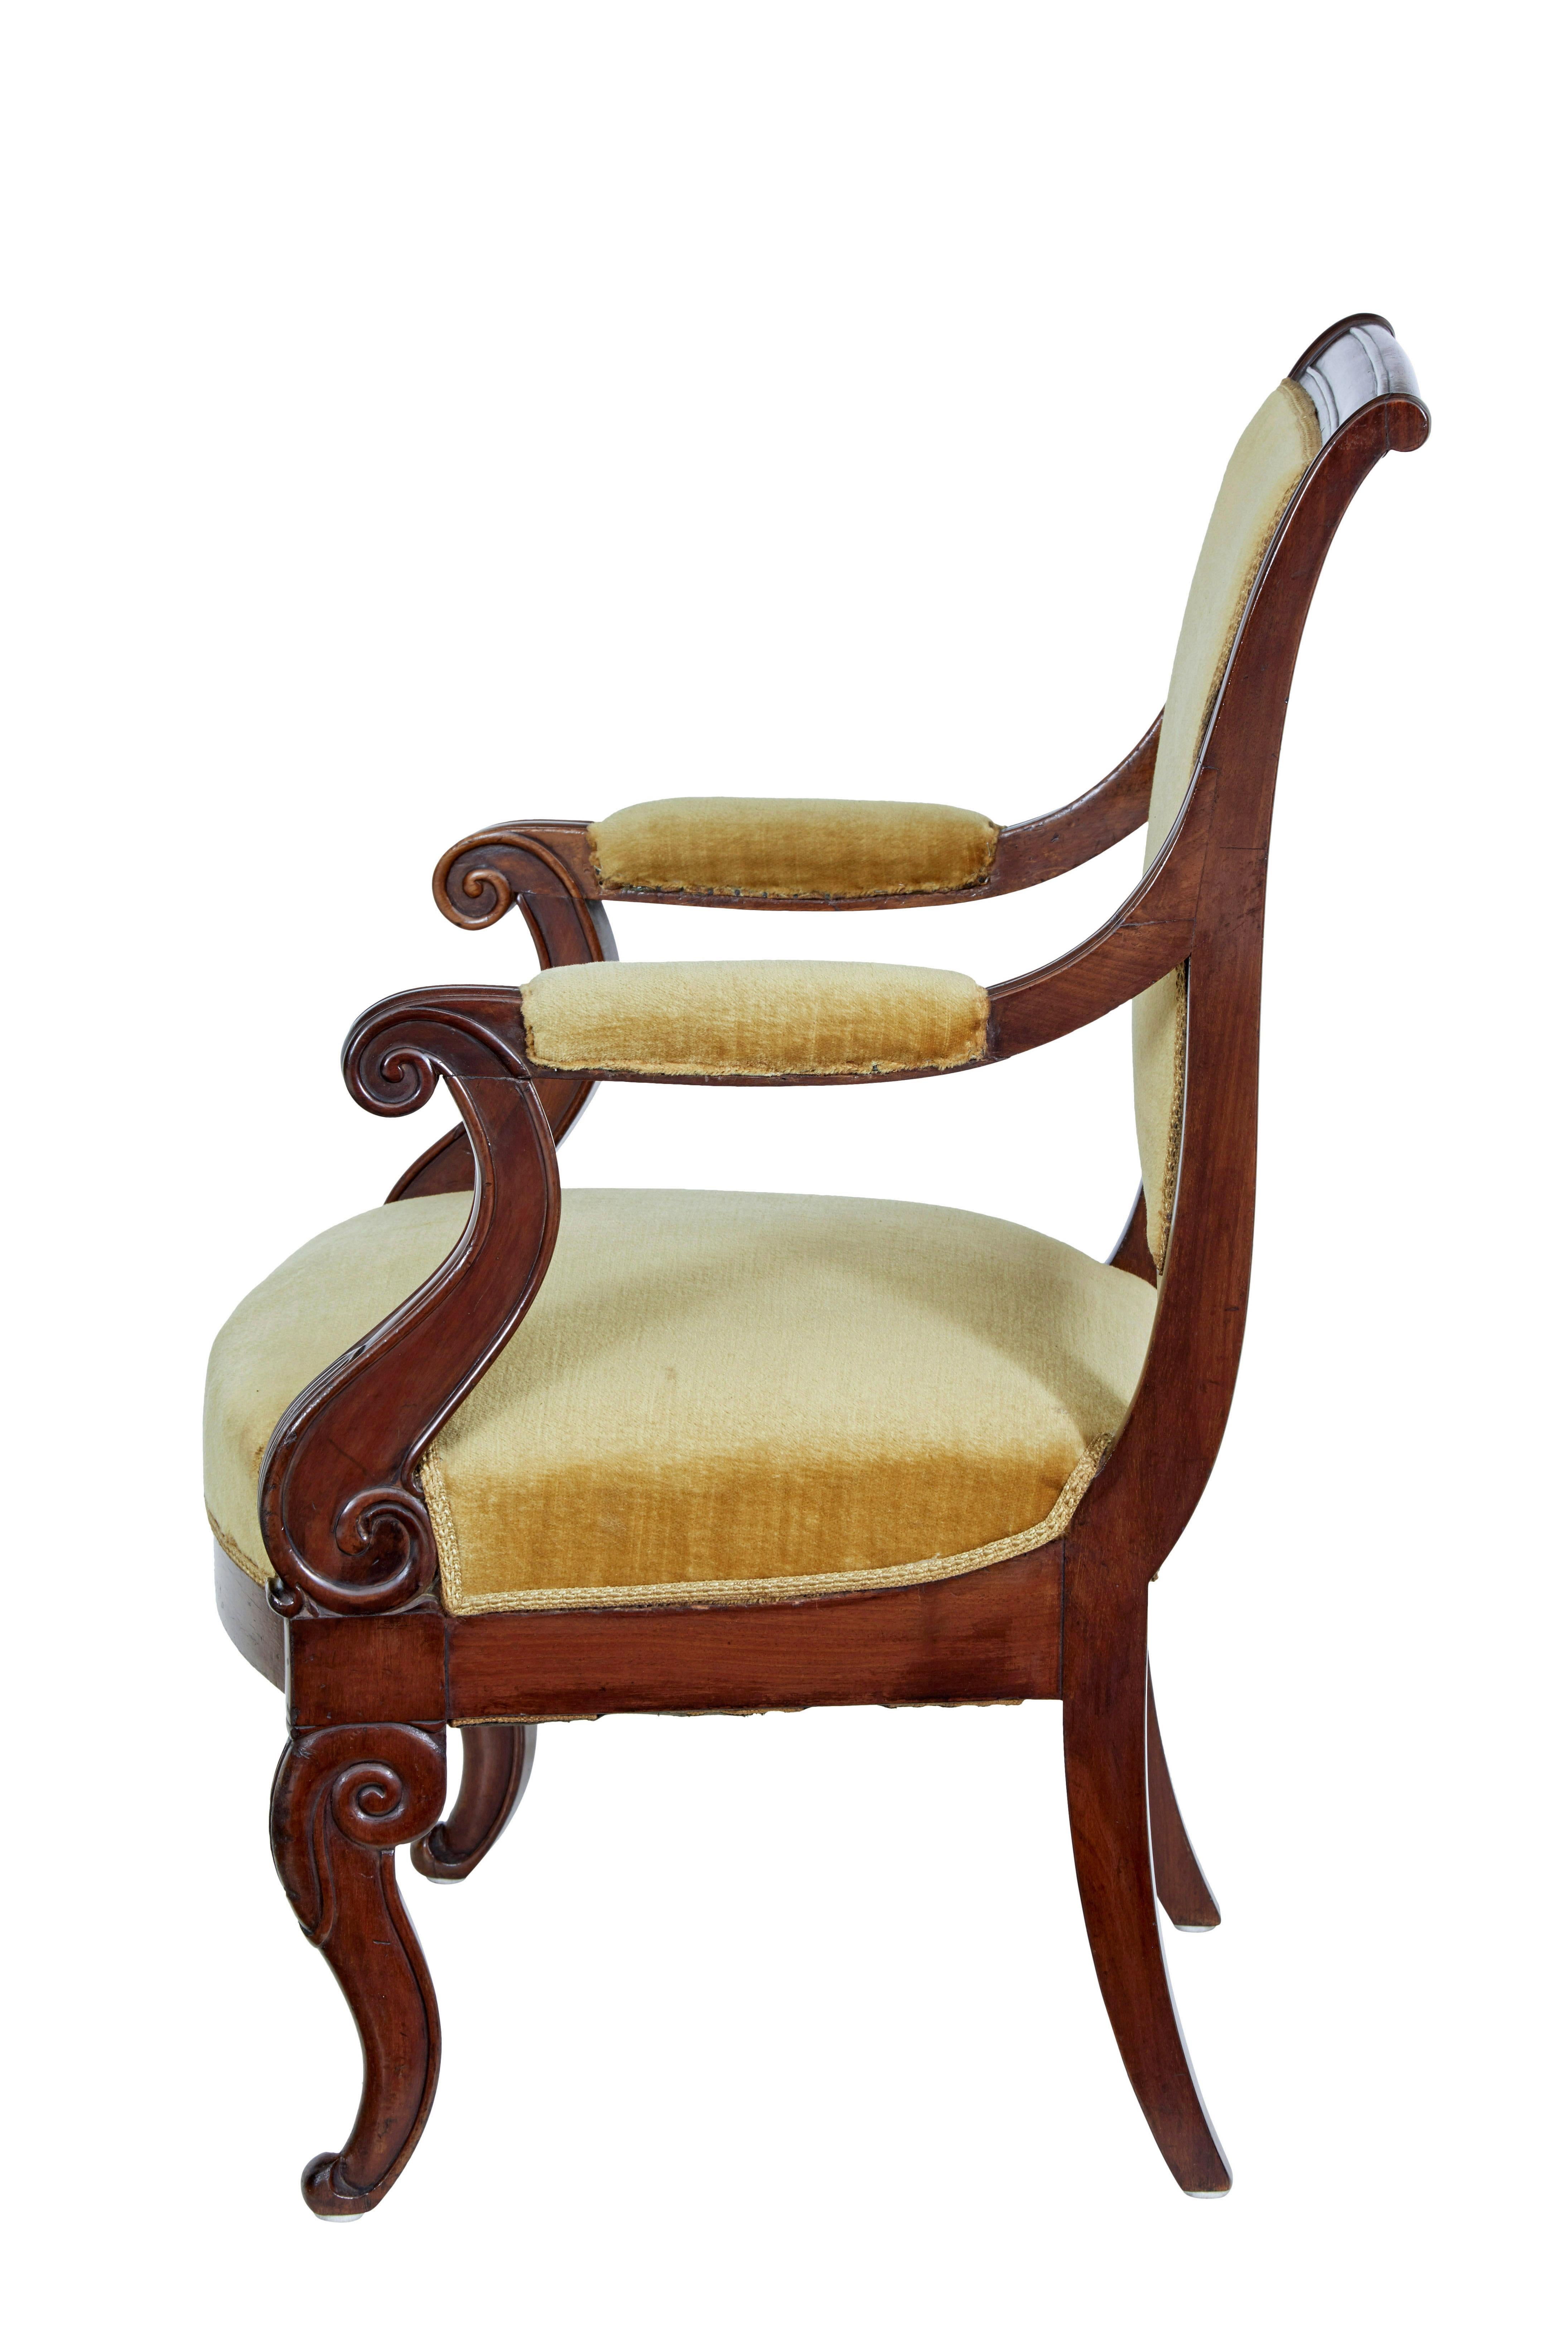 19th century french empire revival mahogany armchair, circa 1860.

Single french armchair made in mahogany. Shaped back linking to the padded armrests and scrolled arms. Front scrolled legs with tapering legs to the rear.

Upholstered in yellow